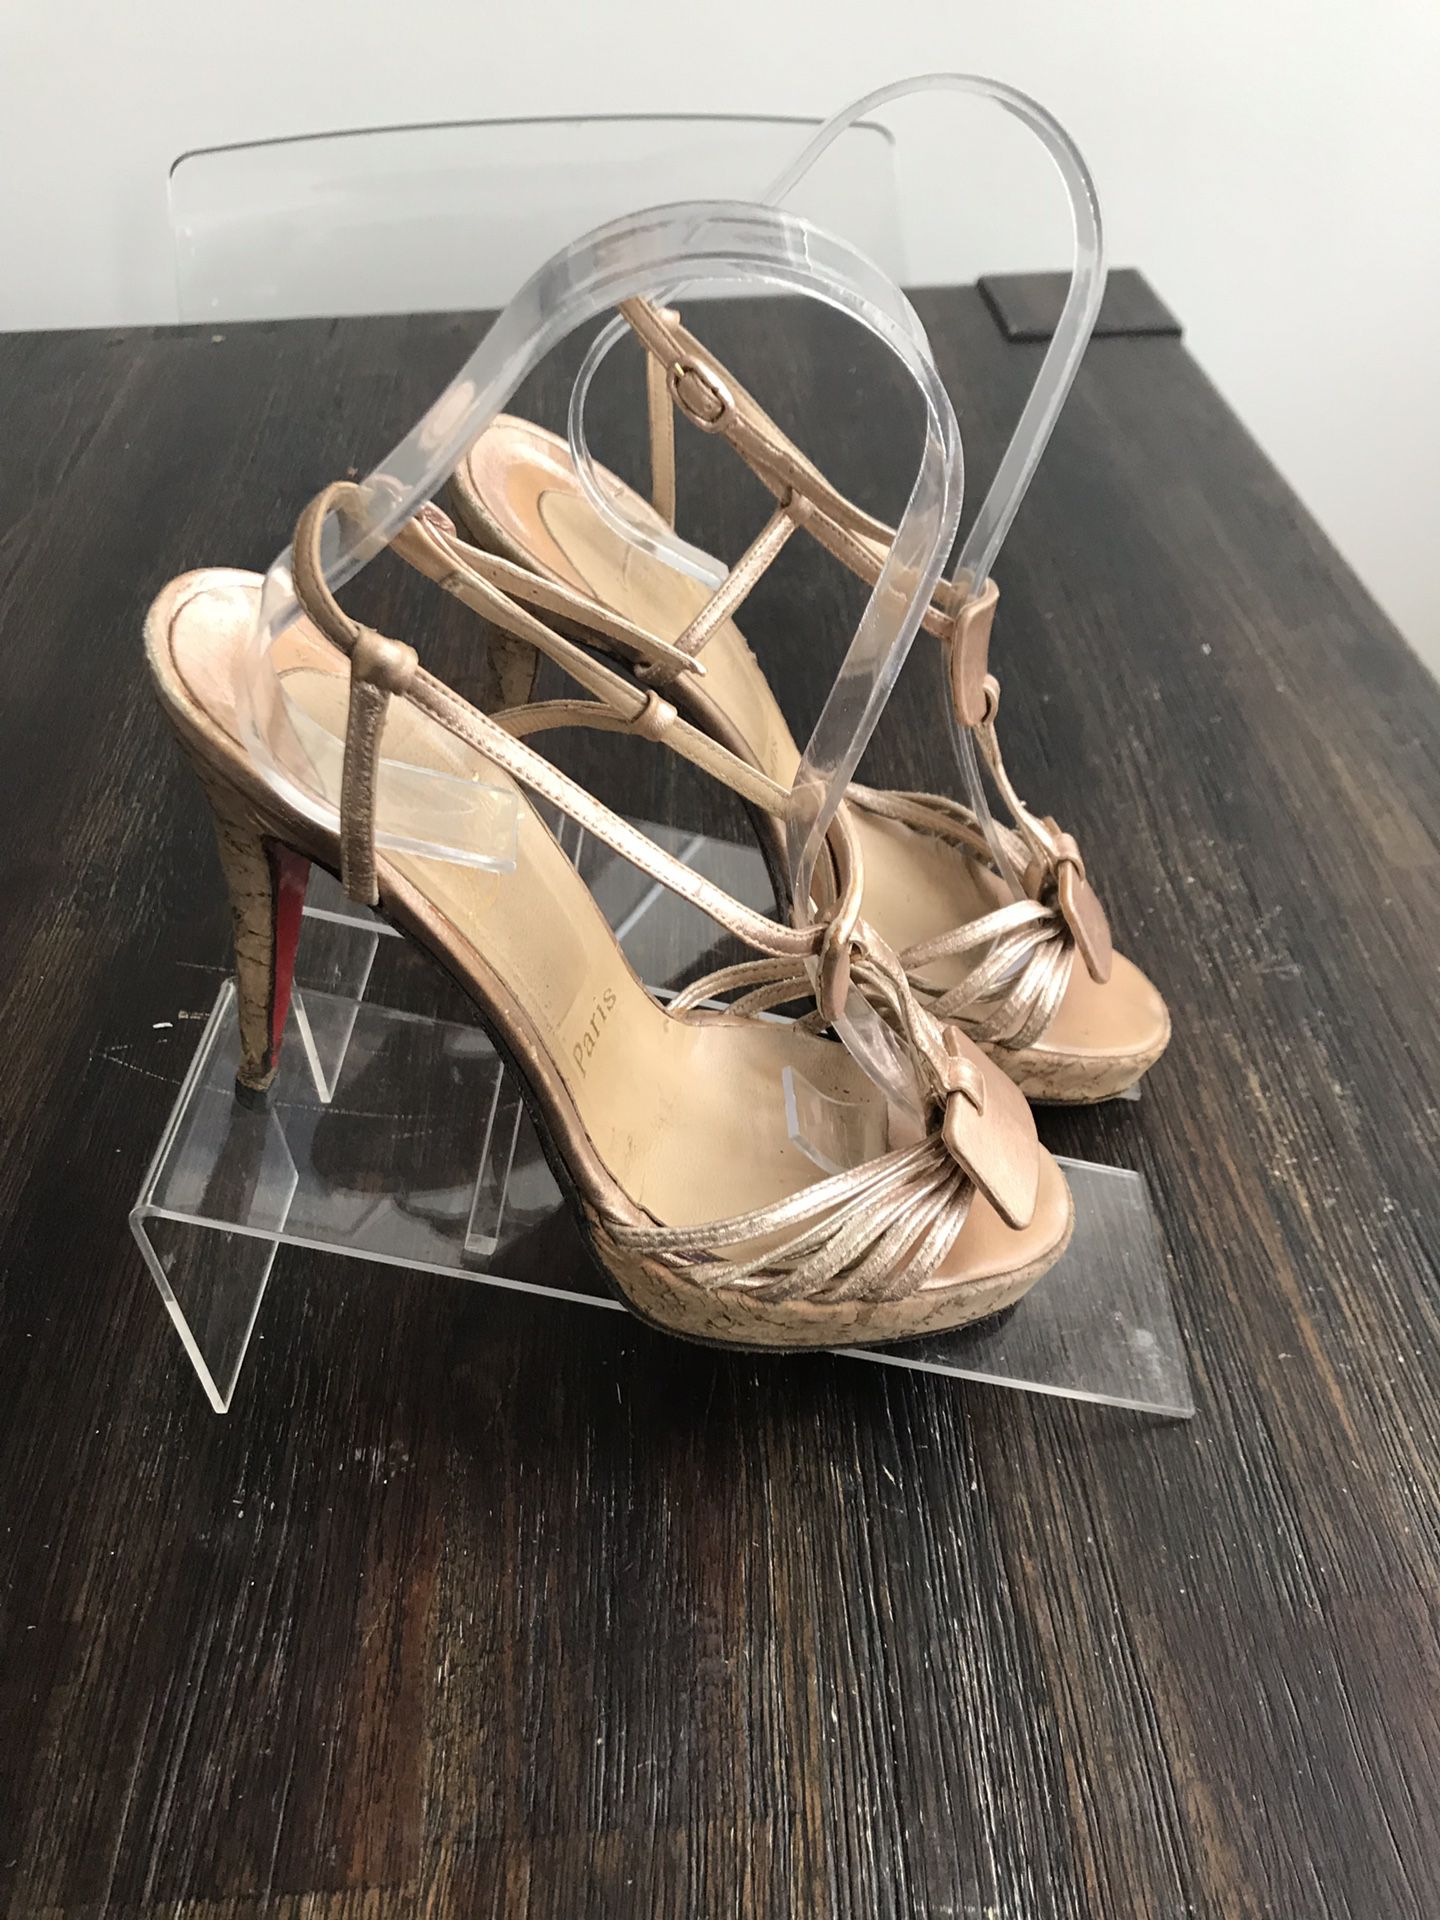 Christian Louboutin 130 Ankle Strap Cut Out Platform Sandal Cork Heel Pump 37.5. Condition is Pre-owned. See pictures ask questions and make an offer!